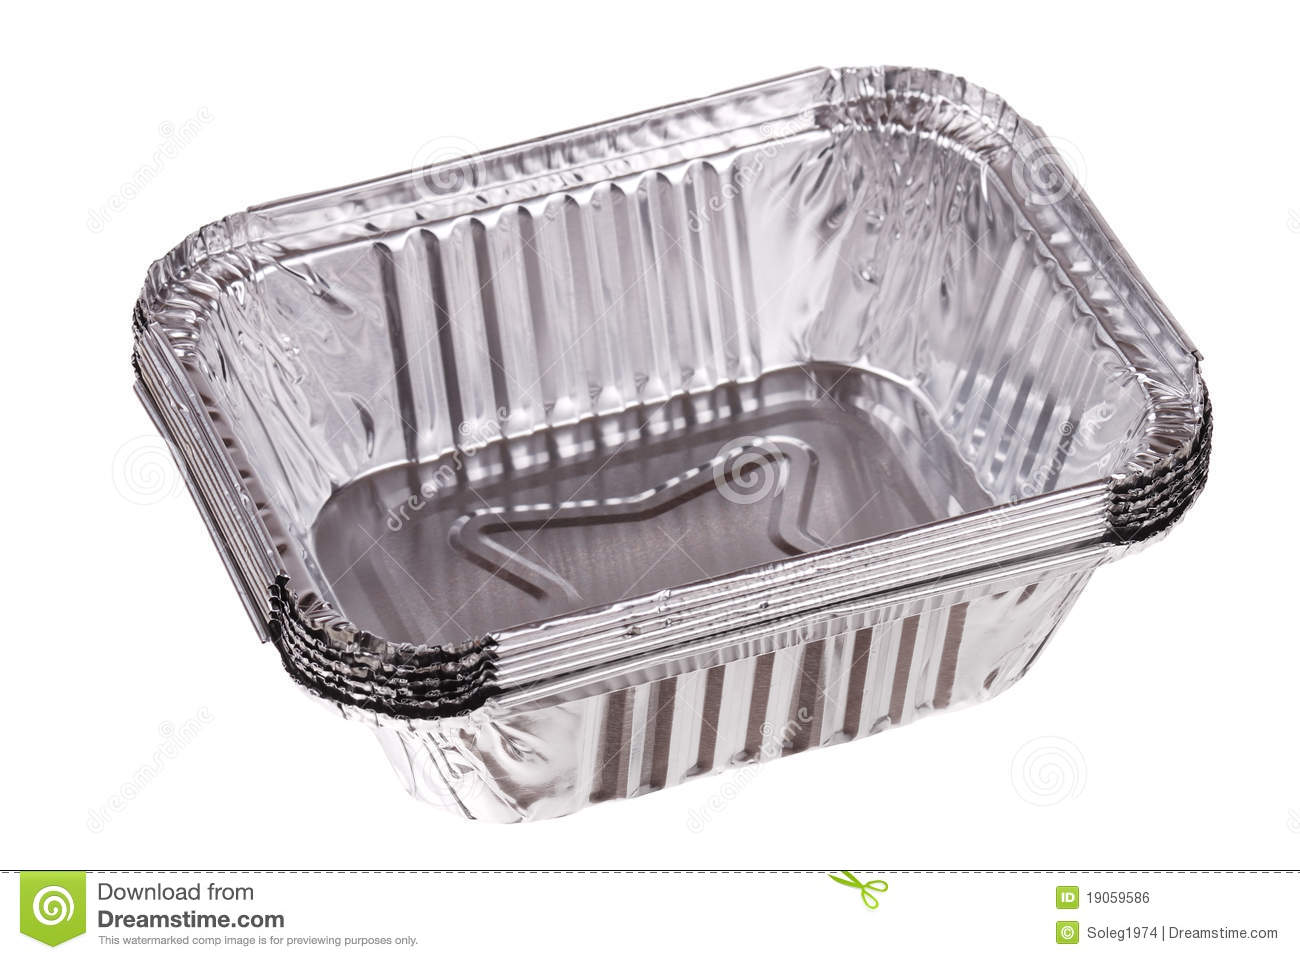 Baking Dish From A Foil Royalty Free Stock Image   Image  19059586